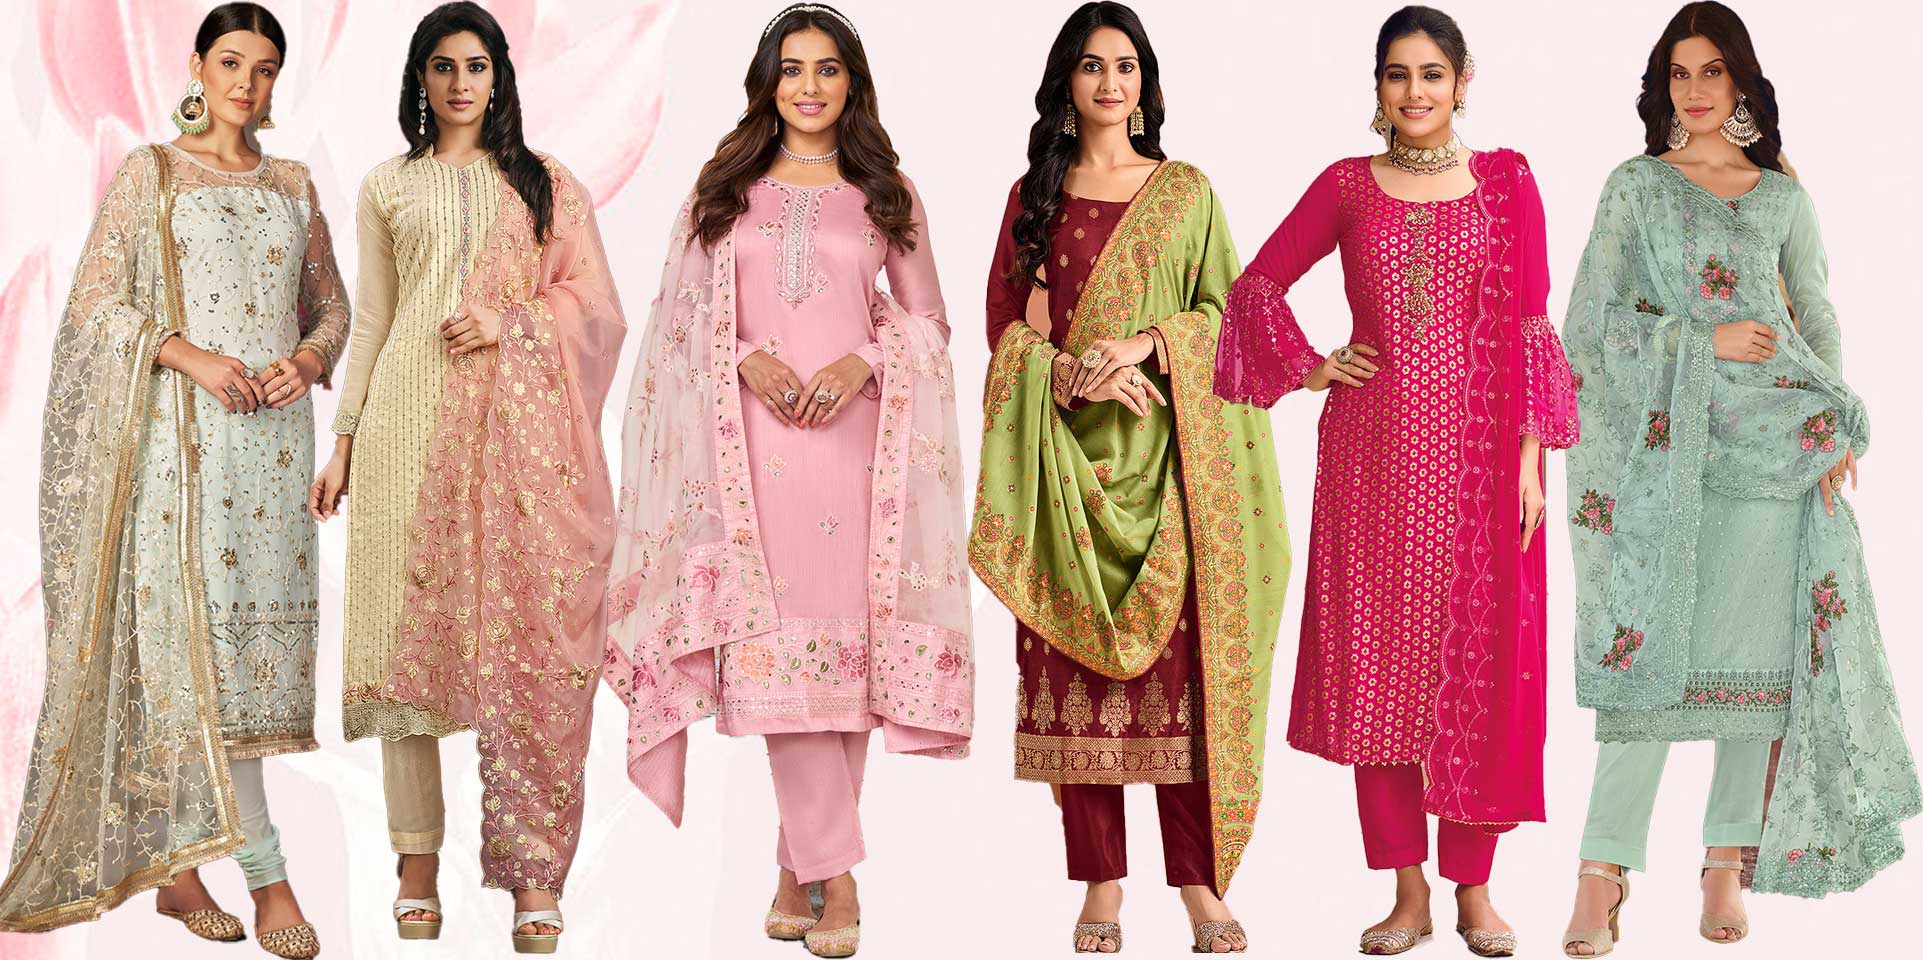 What are the Popular Churidar Style Tips Using Churidar Designs to Look Slim?